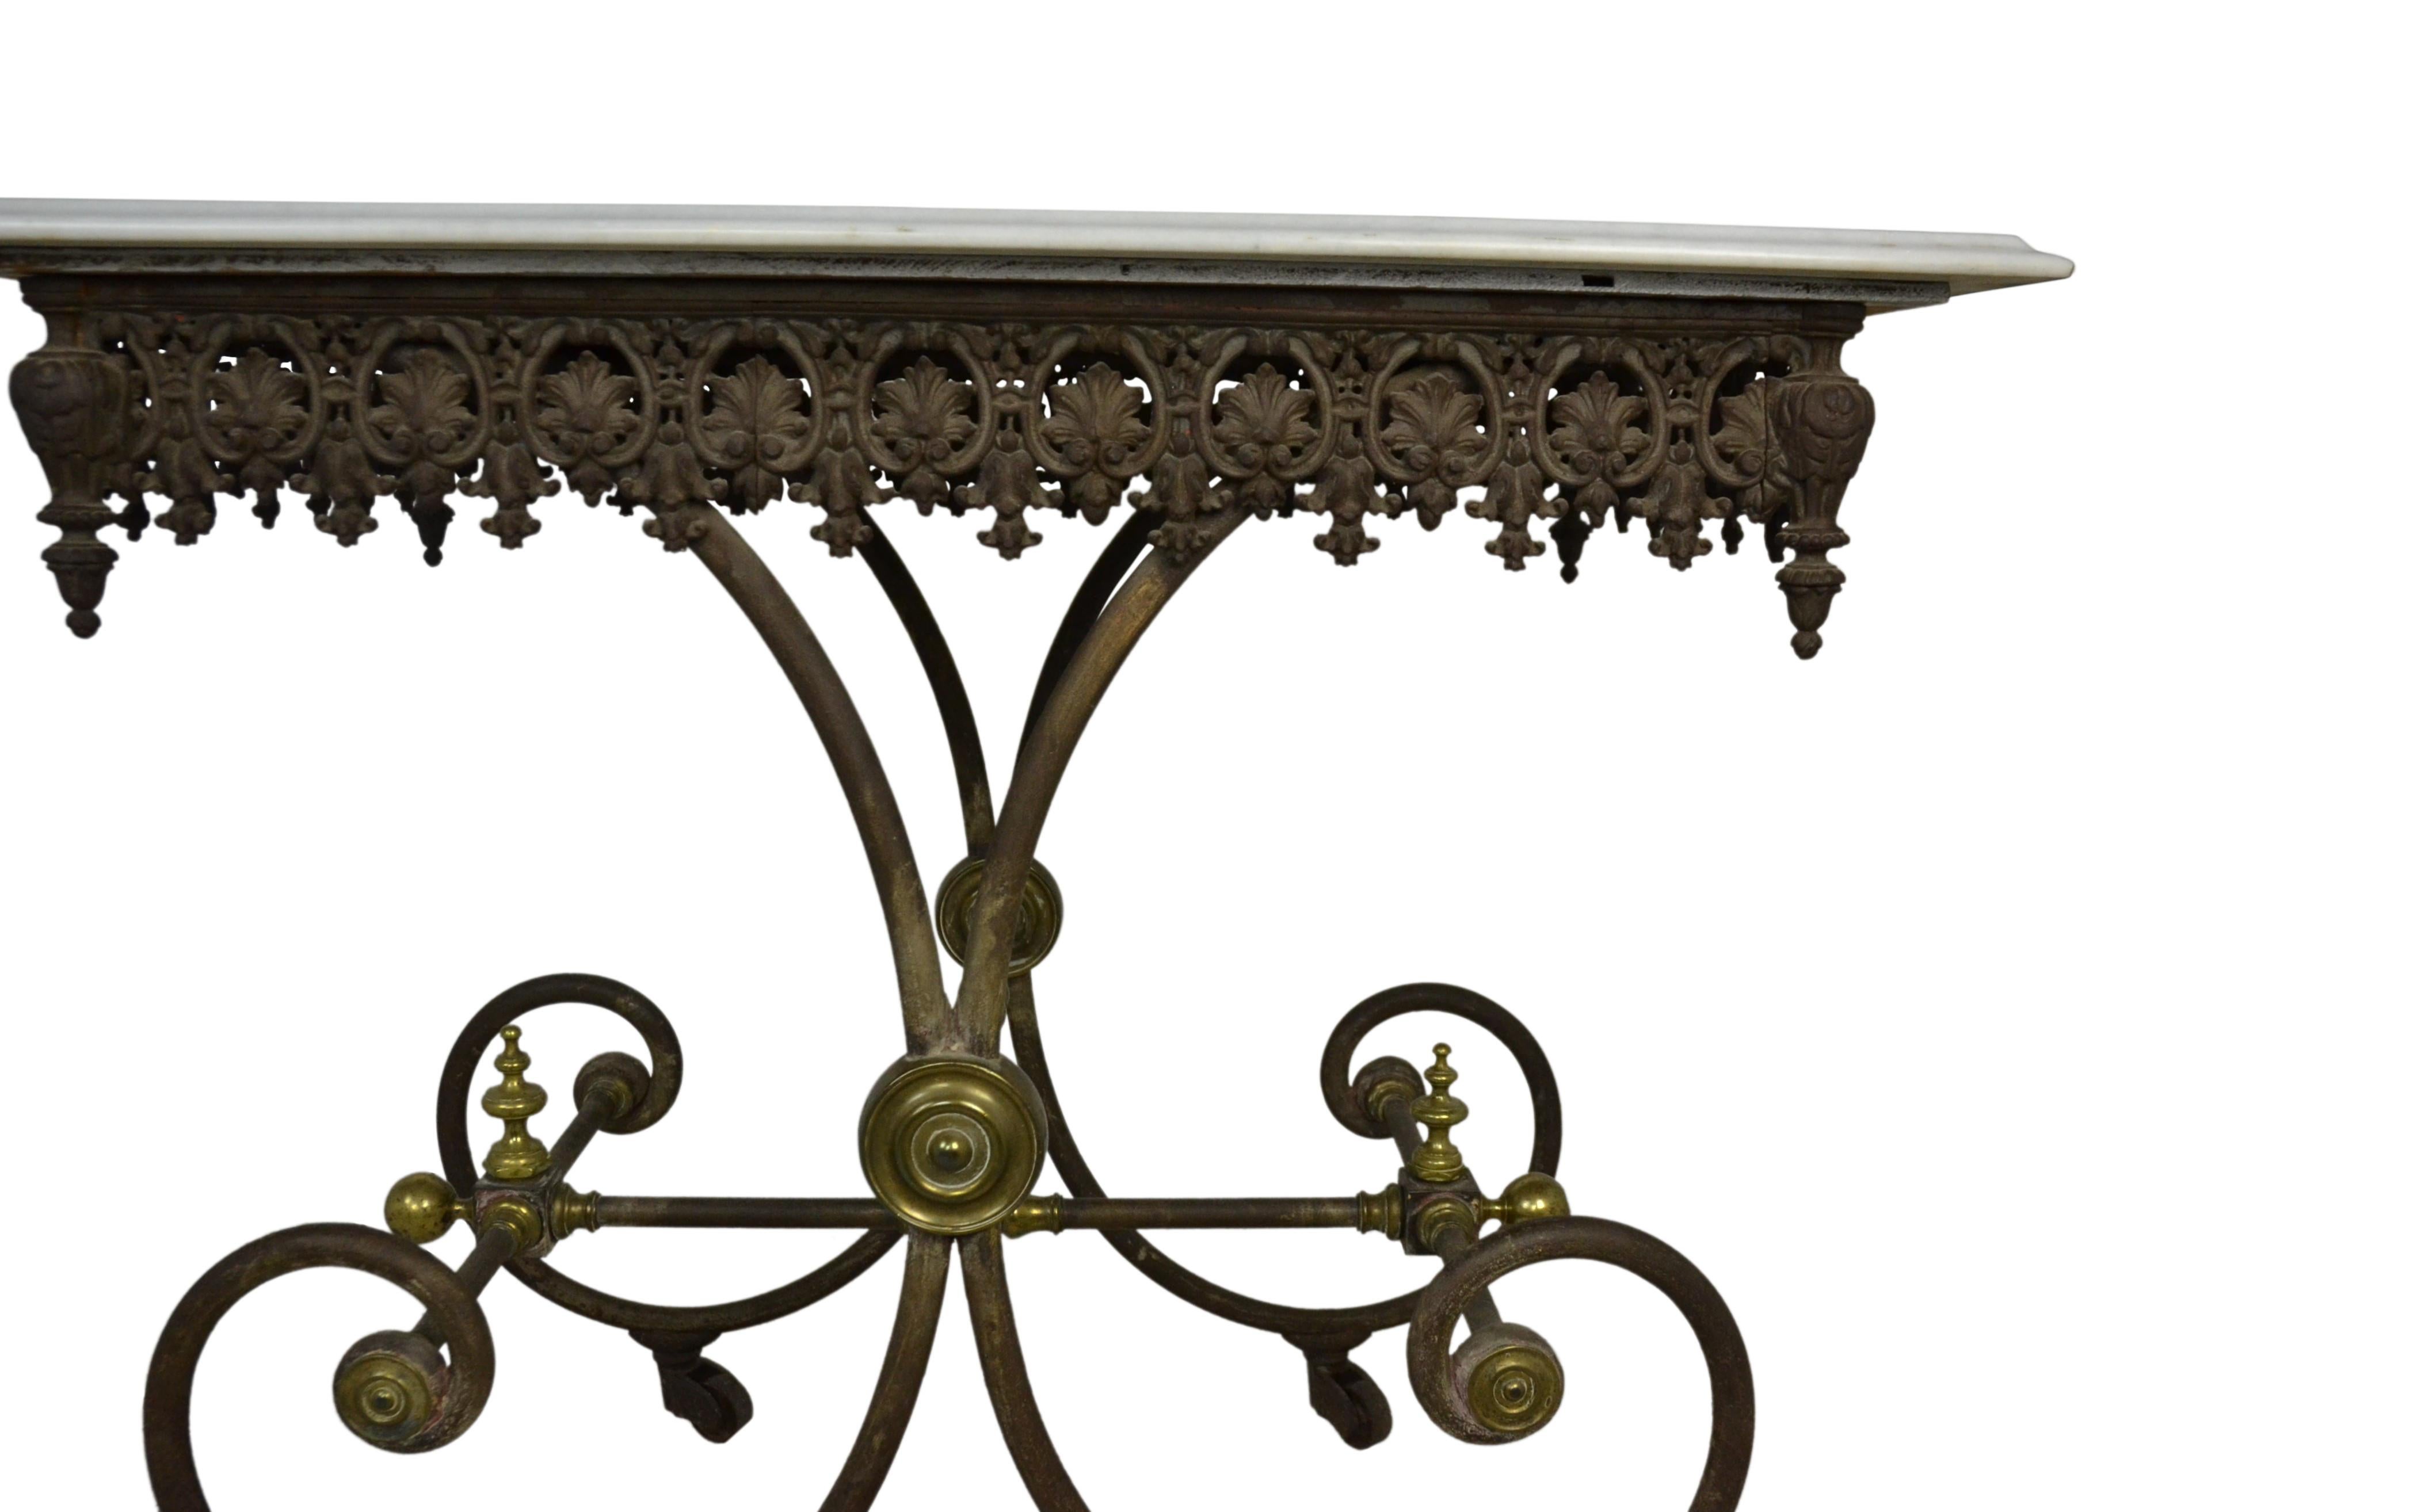 A quality antique French pastry table from the 19th century. Iron base with brass finials and medallions. Iron wheels or casters. Fretwork frieze decorated with leaf design. White marble top, 19th century.